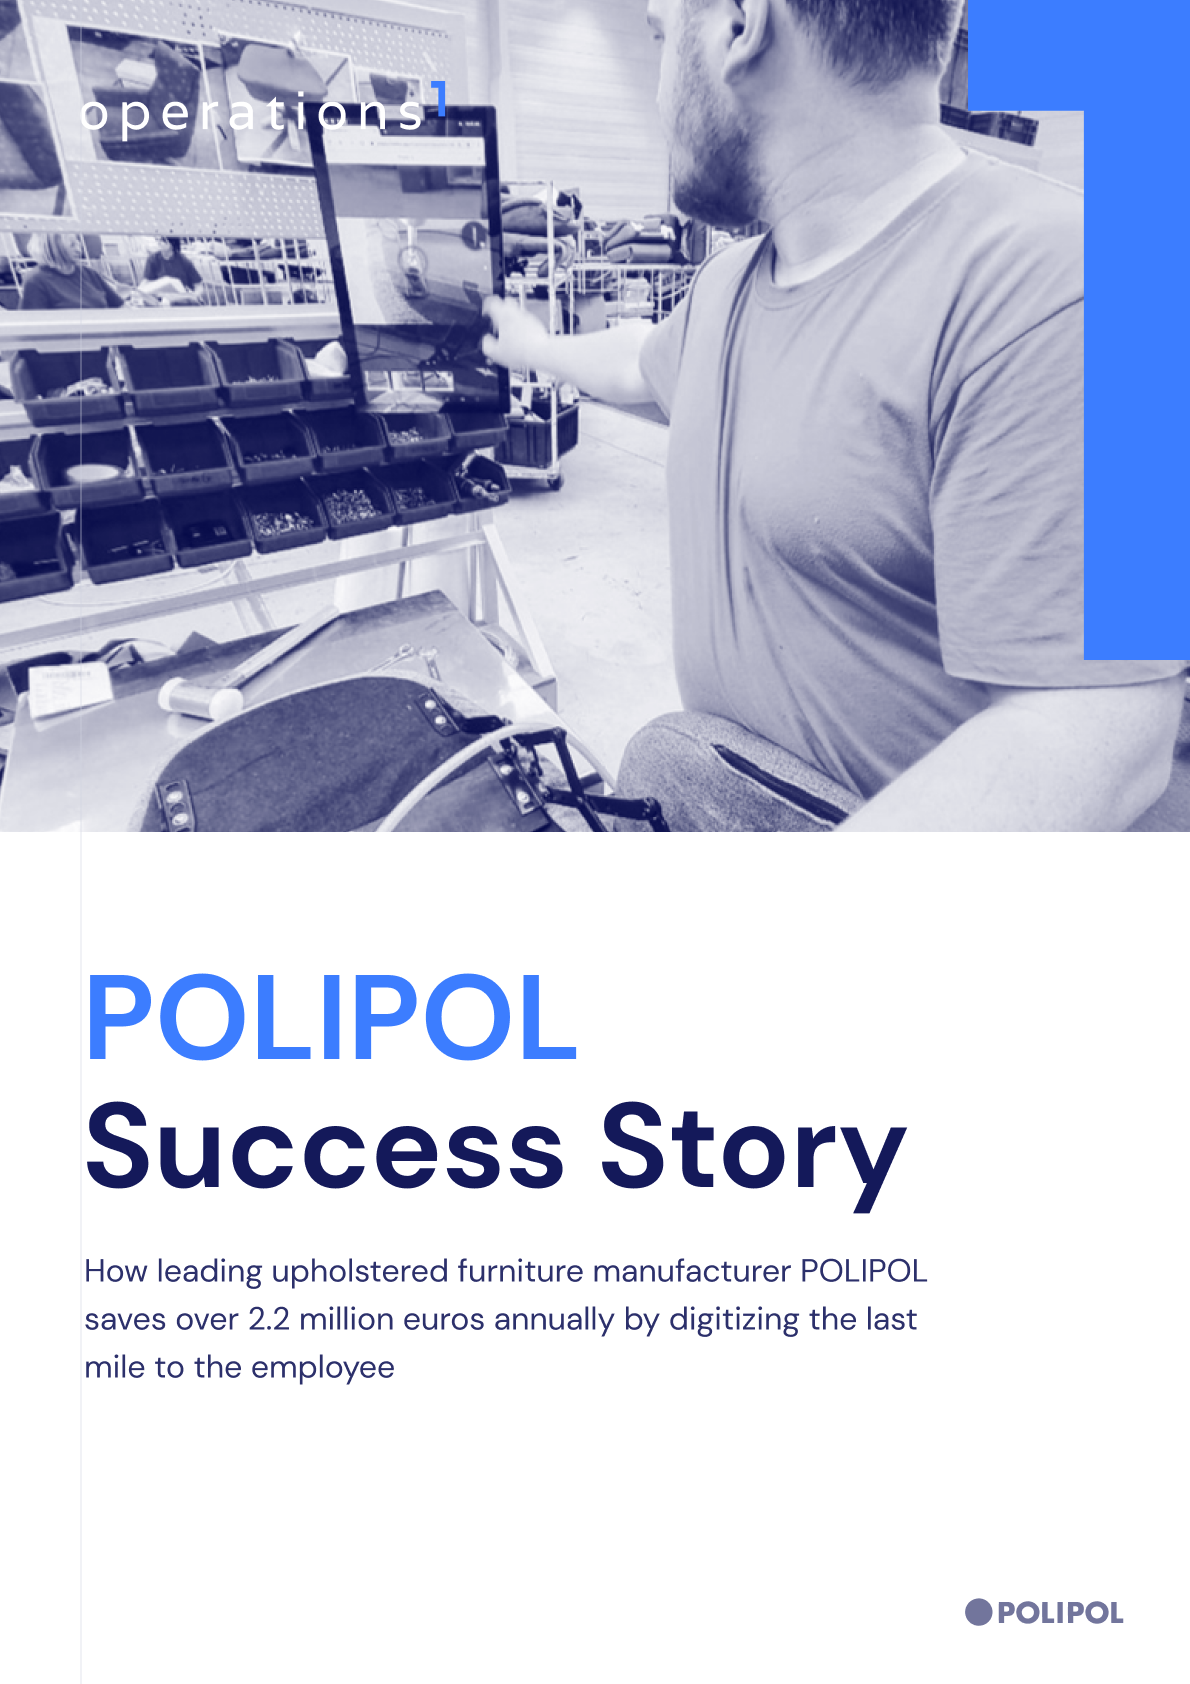 Potential savings at POLIPOL in the millions thanks to digitized processes